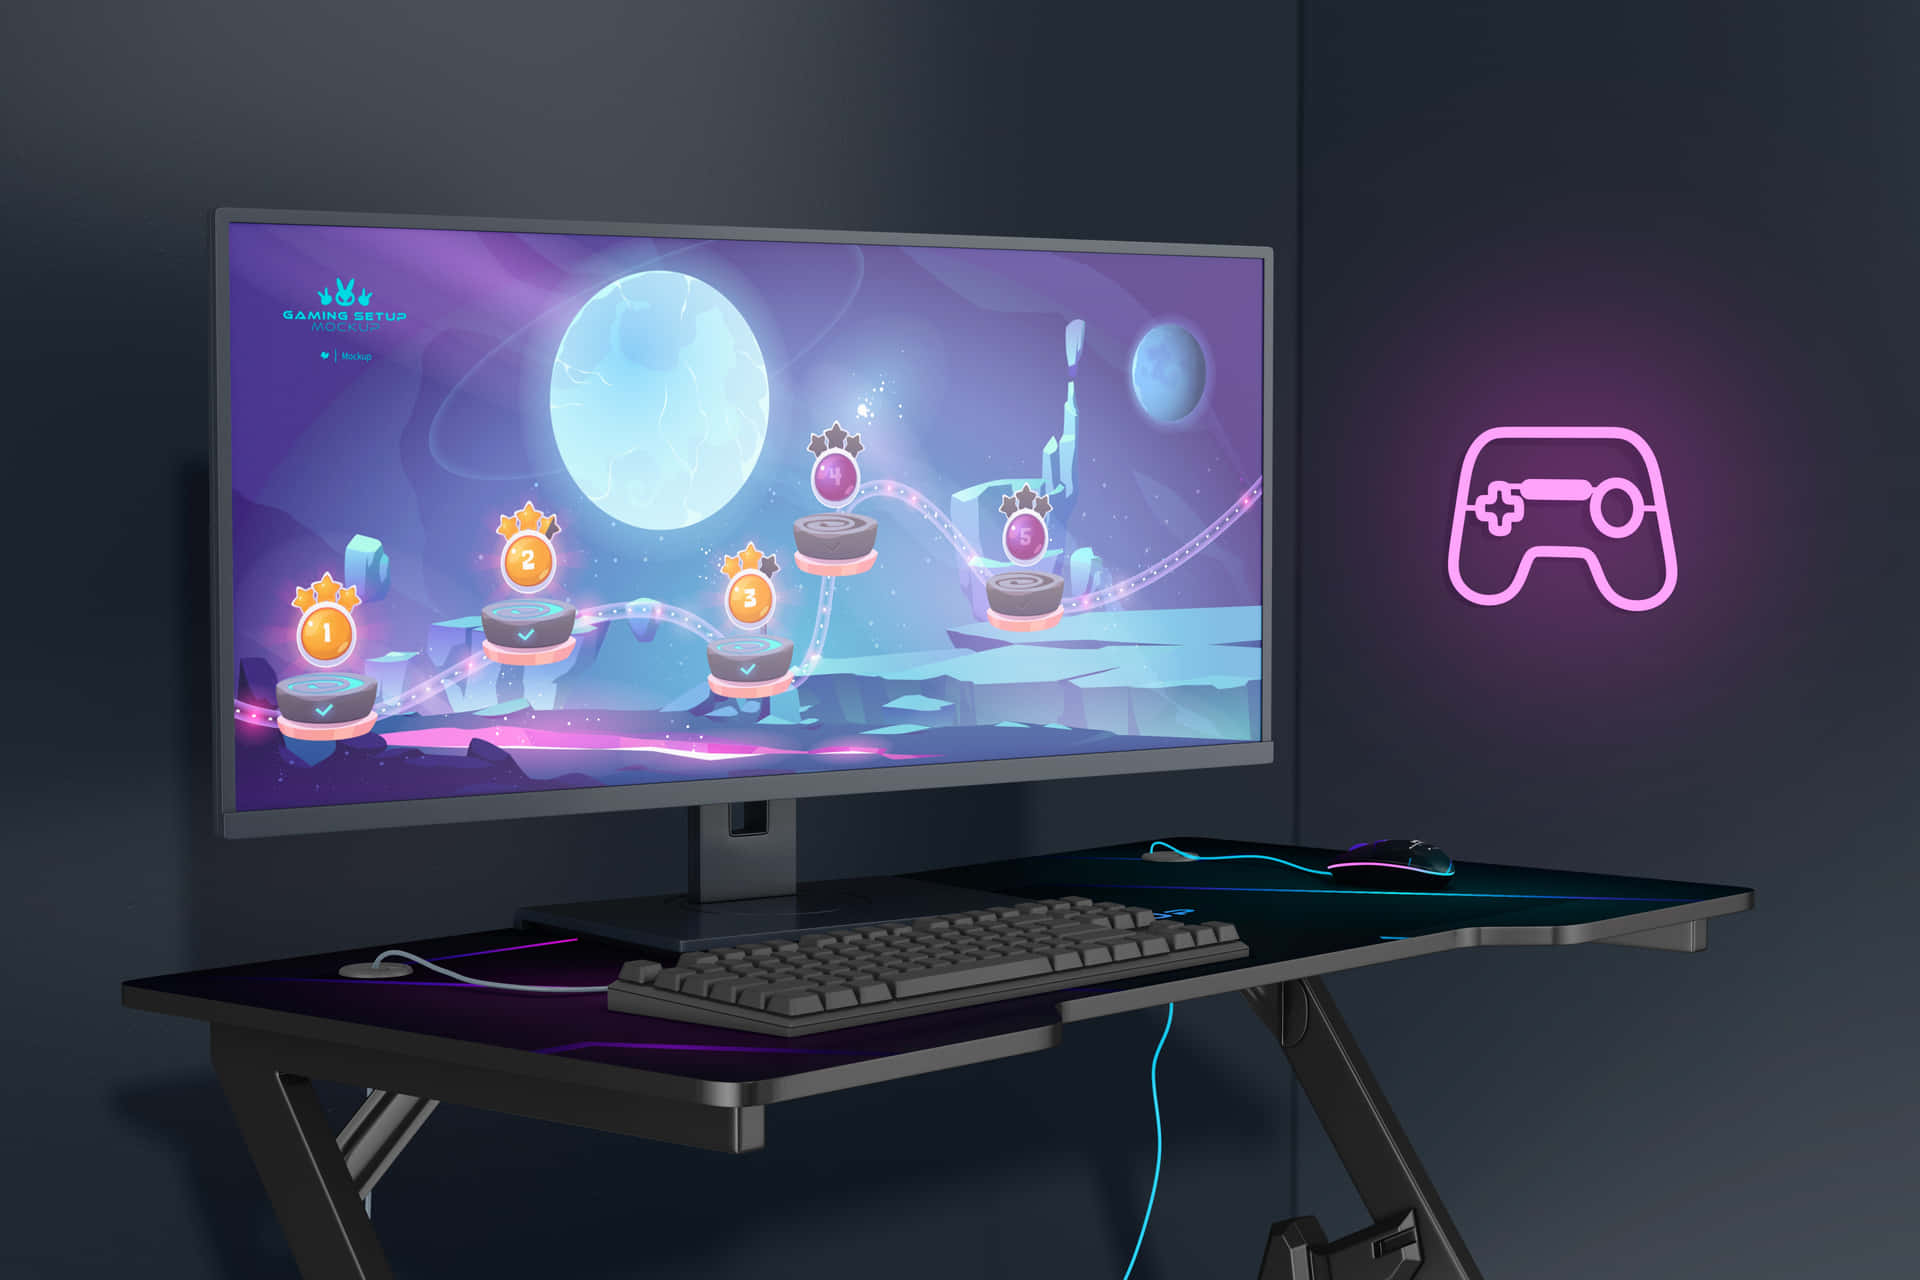 Take your gaming to the next level with this sleek gaming PC setup! Wallpaper